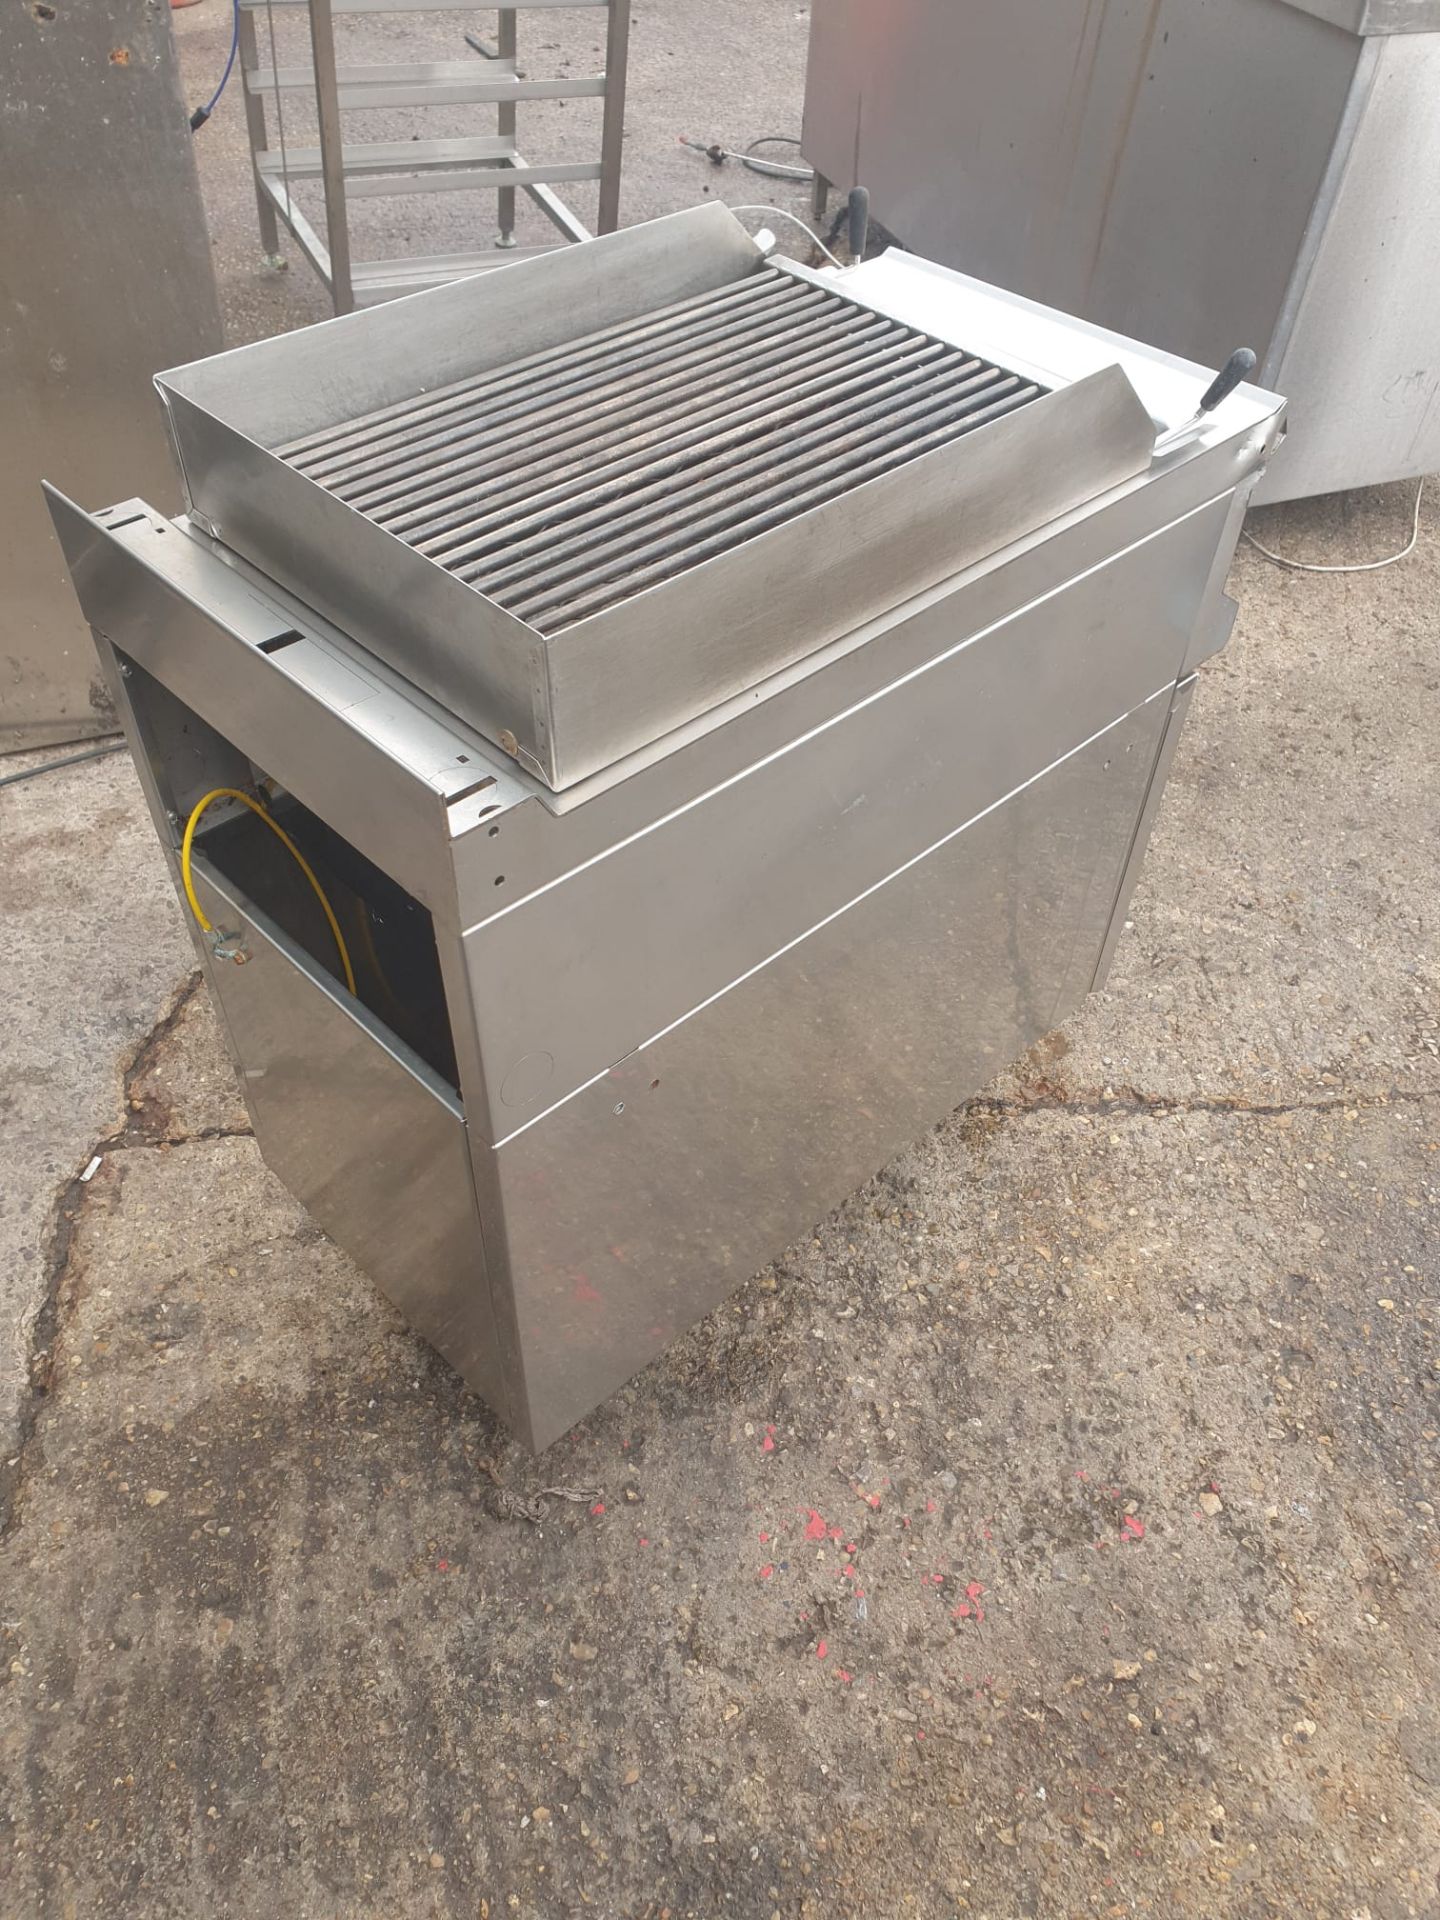 CHARGRILL 450 MM WIDE - FULLY WORKING - NATURAL GAS - Bild 4 aus 4